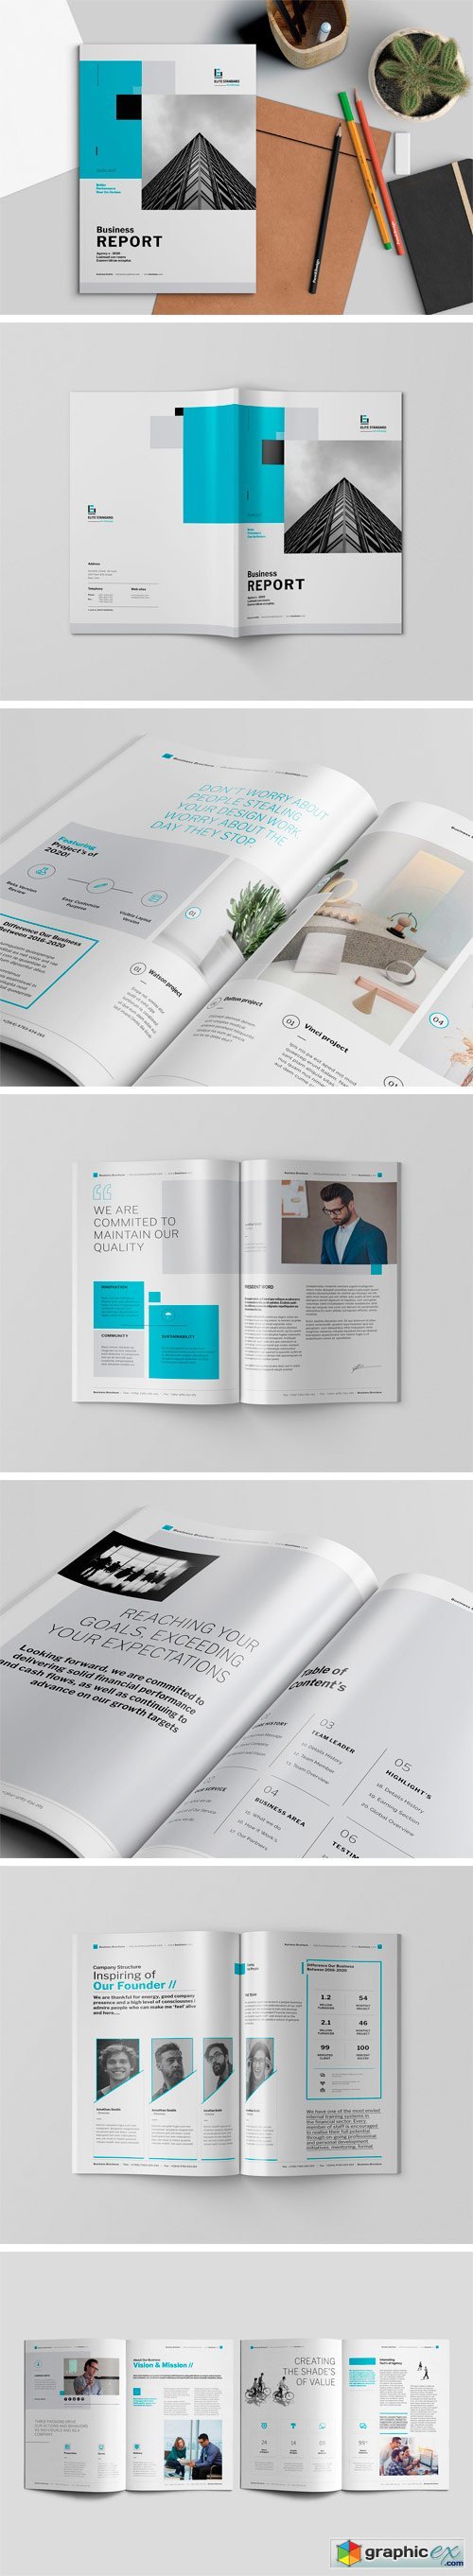 Business Report Template 1480538